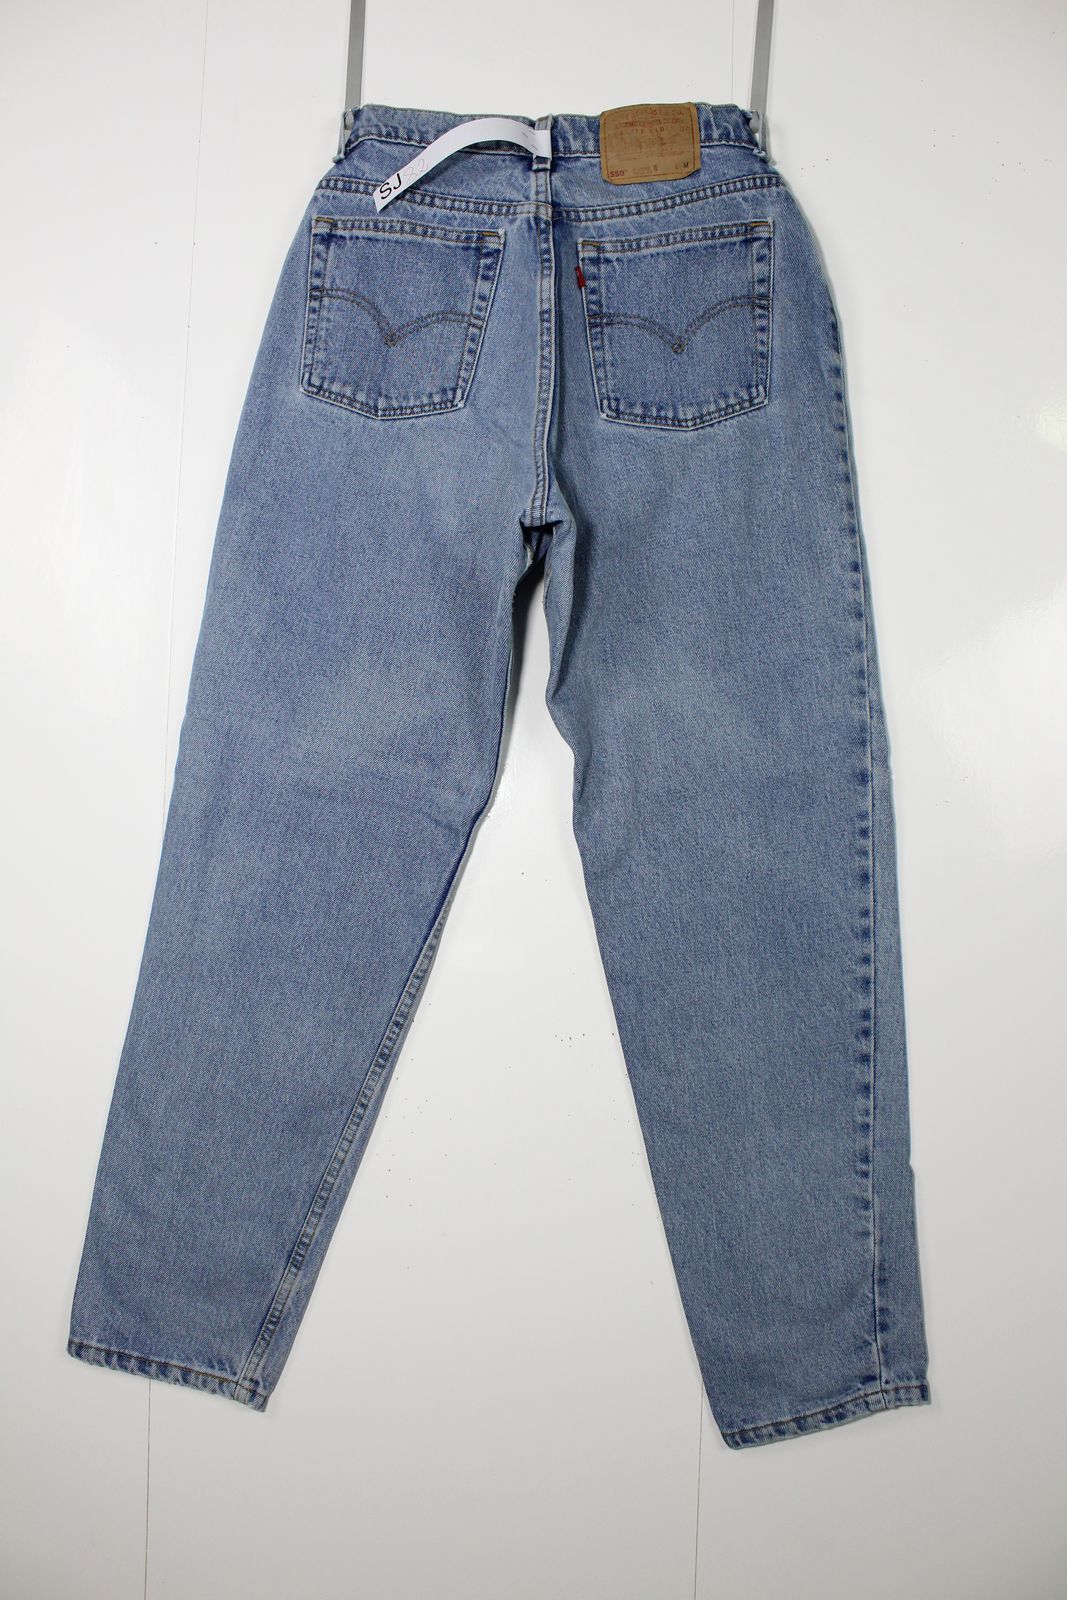 Levi's 550 Relaxed Fit Made In USA Taglia 14 Reg. Jeans Vintage